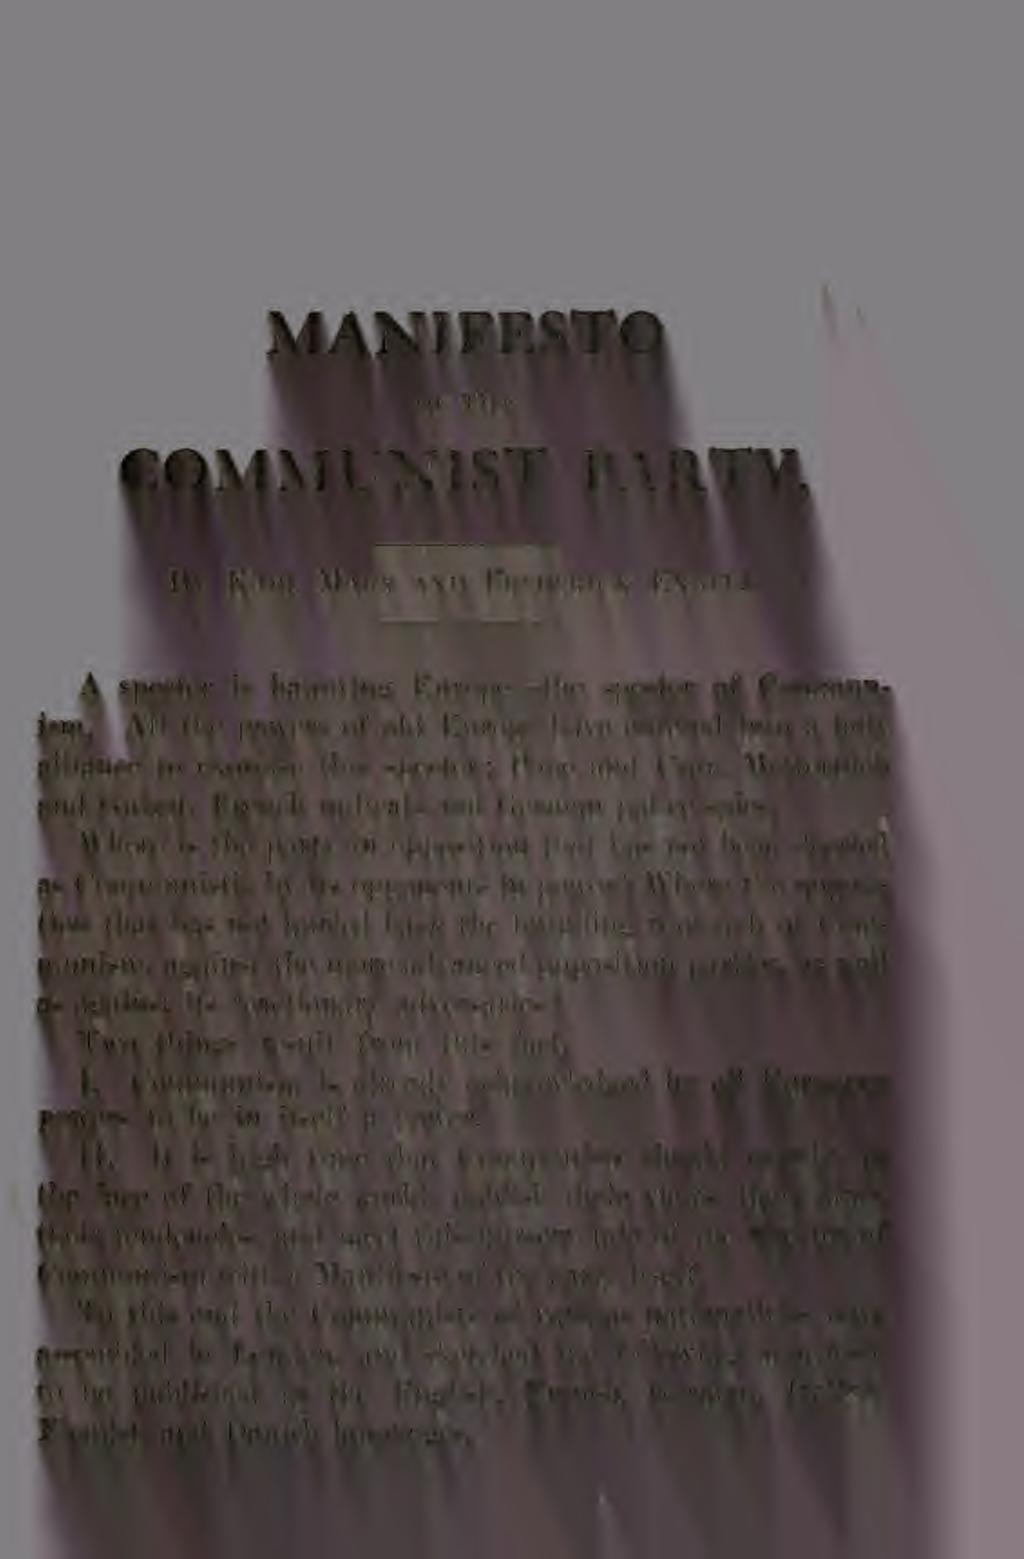 MANIFESTO OF THE COMMUNIST PARTY. By Karl Marx and Frederick Engels. A specter is haunting Europe the specter of Communism.